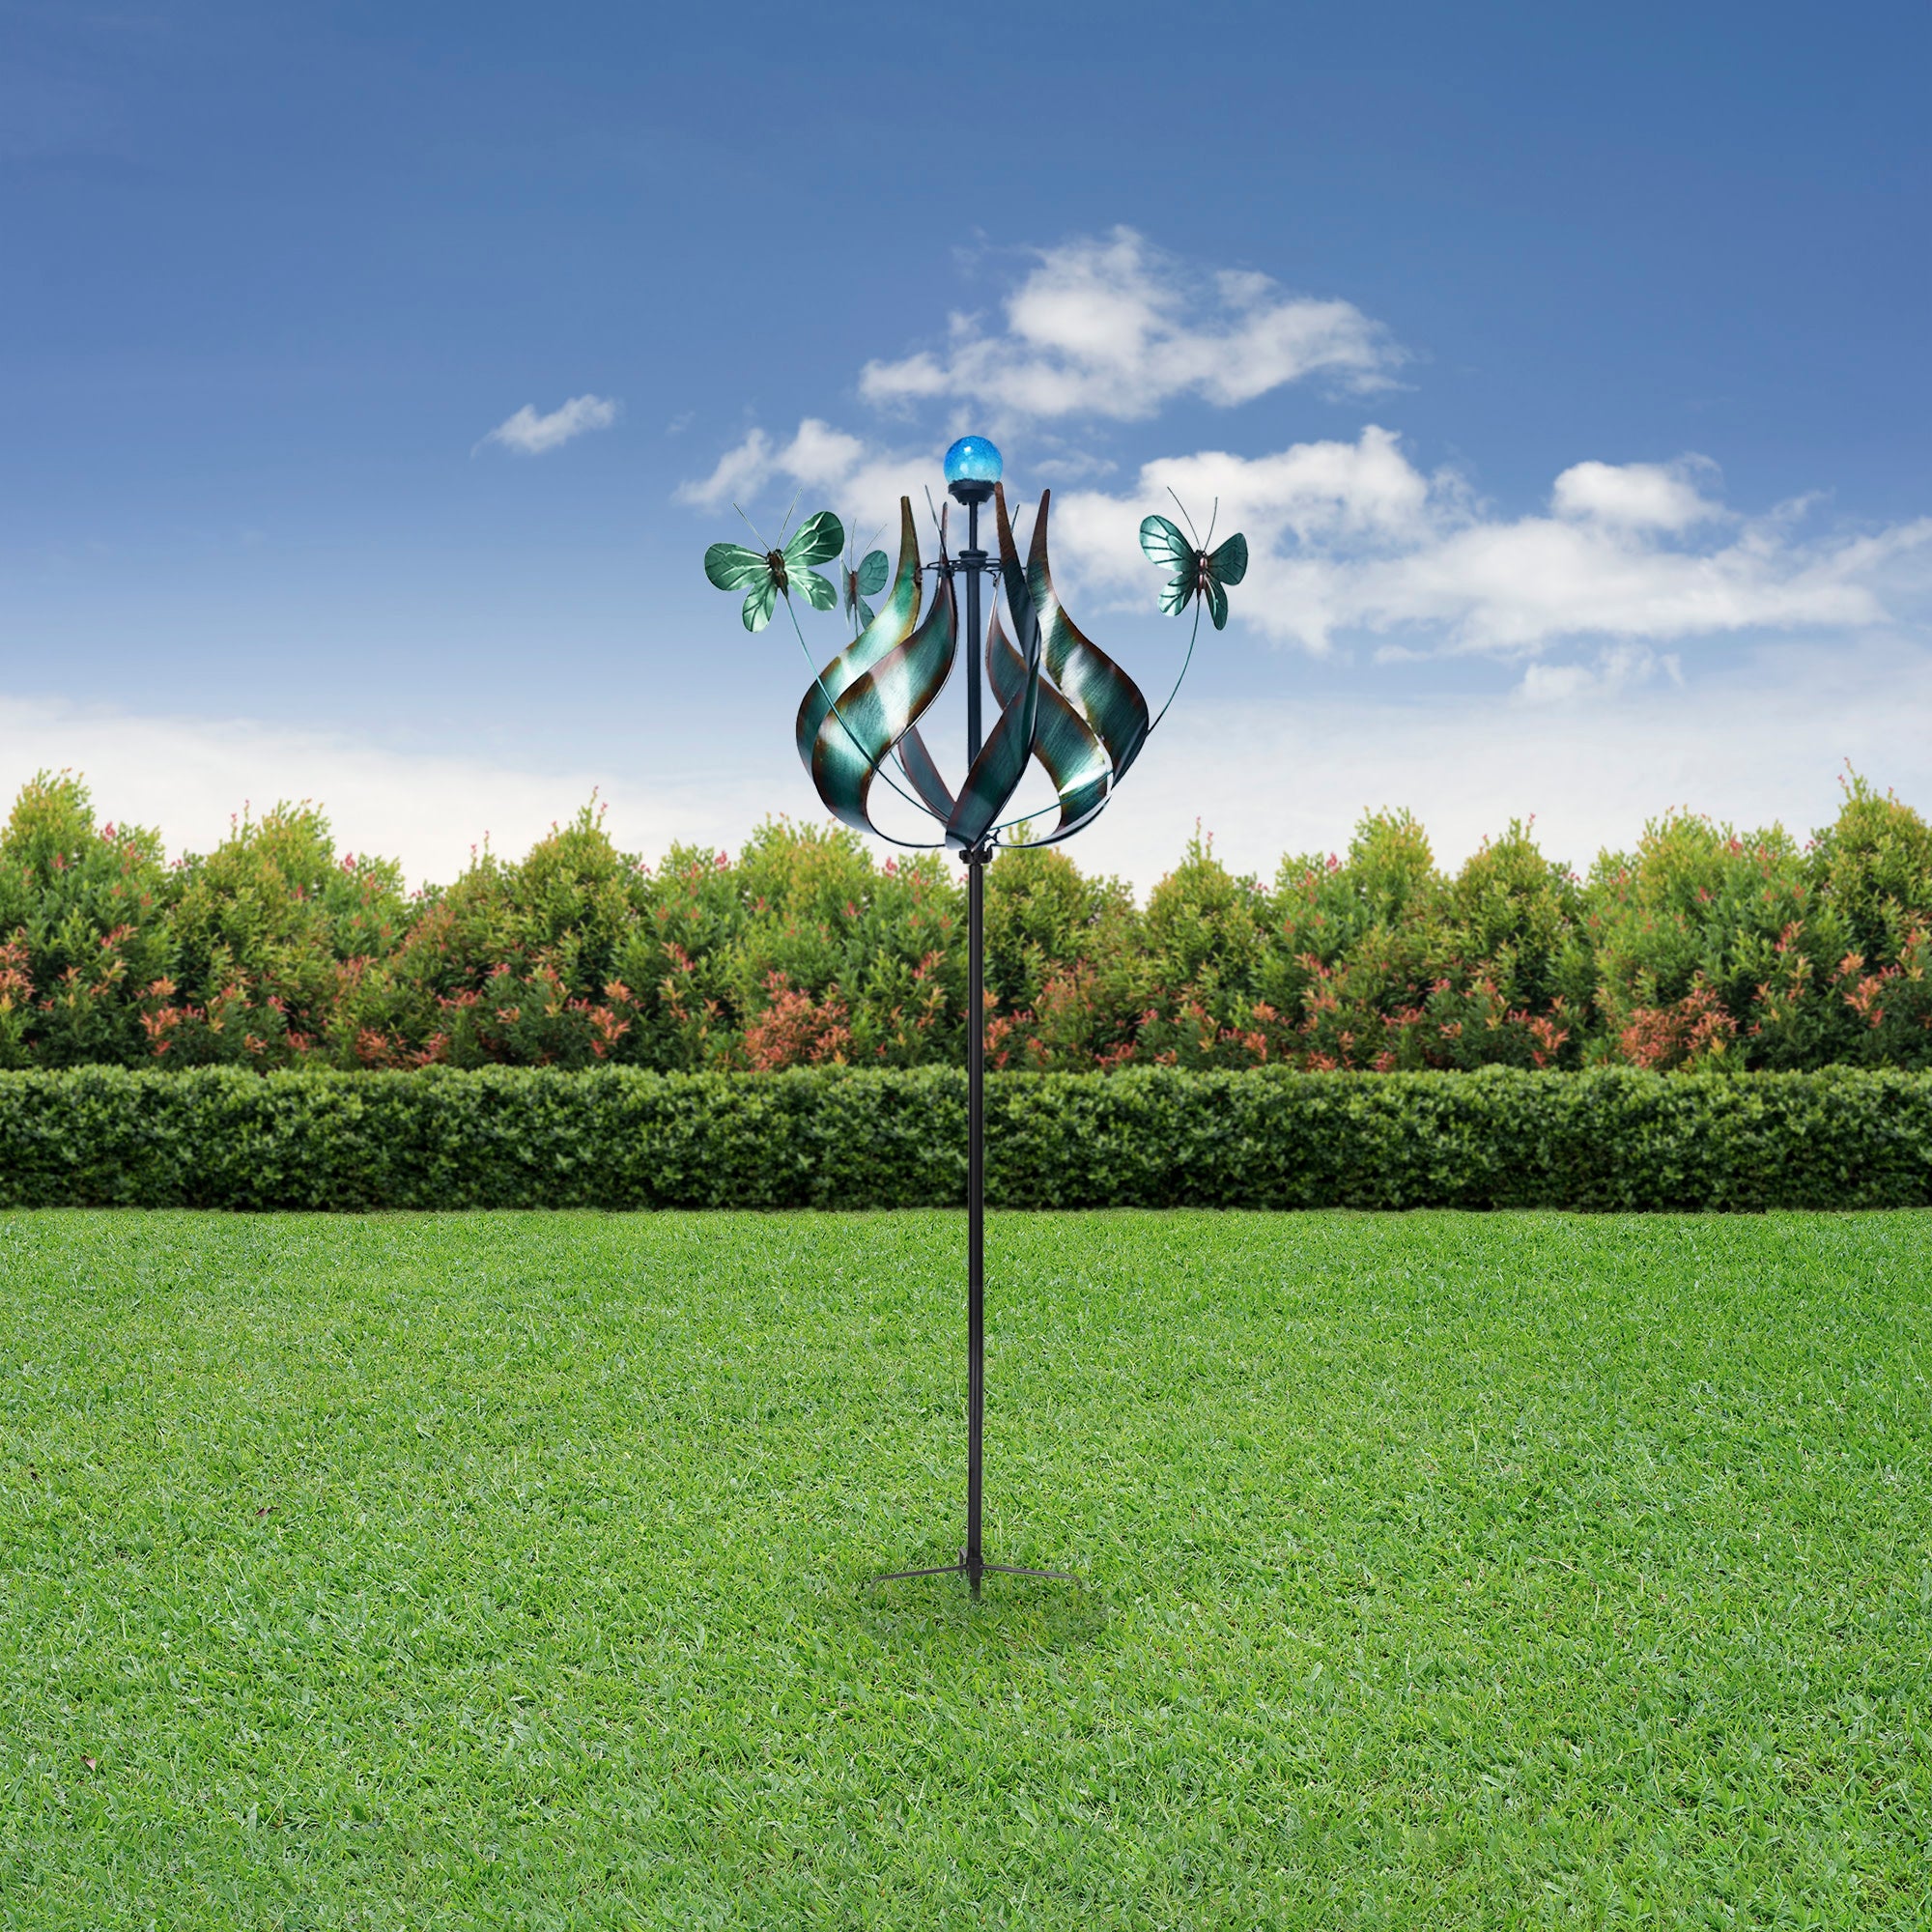 Teamson Home Outdoor Solar Tulip and Butterfly Kinetic Windmill Sculpture with LED Light, Teal